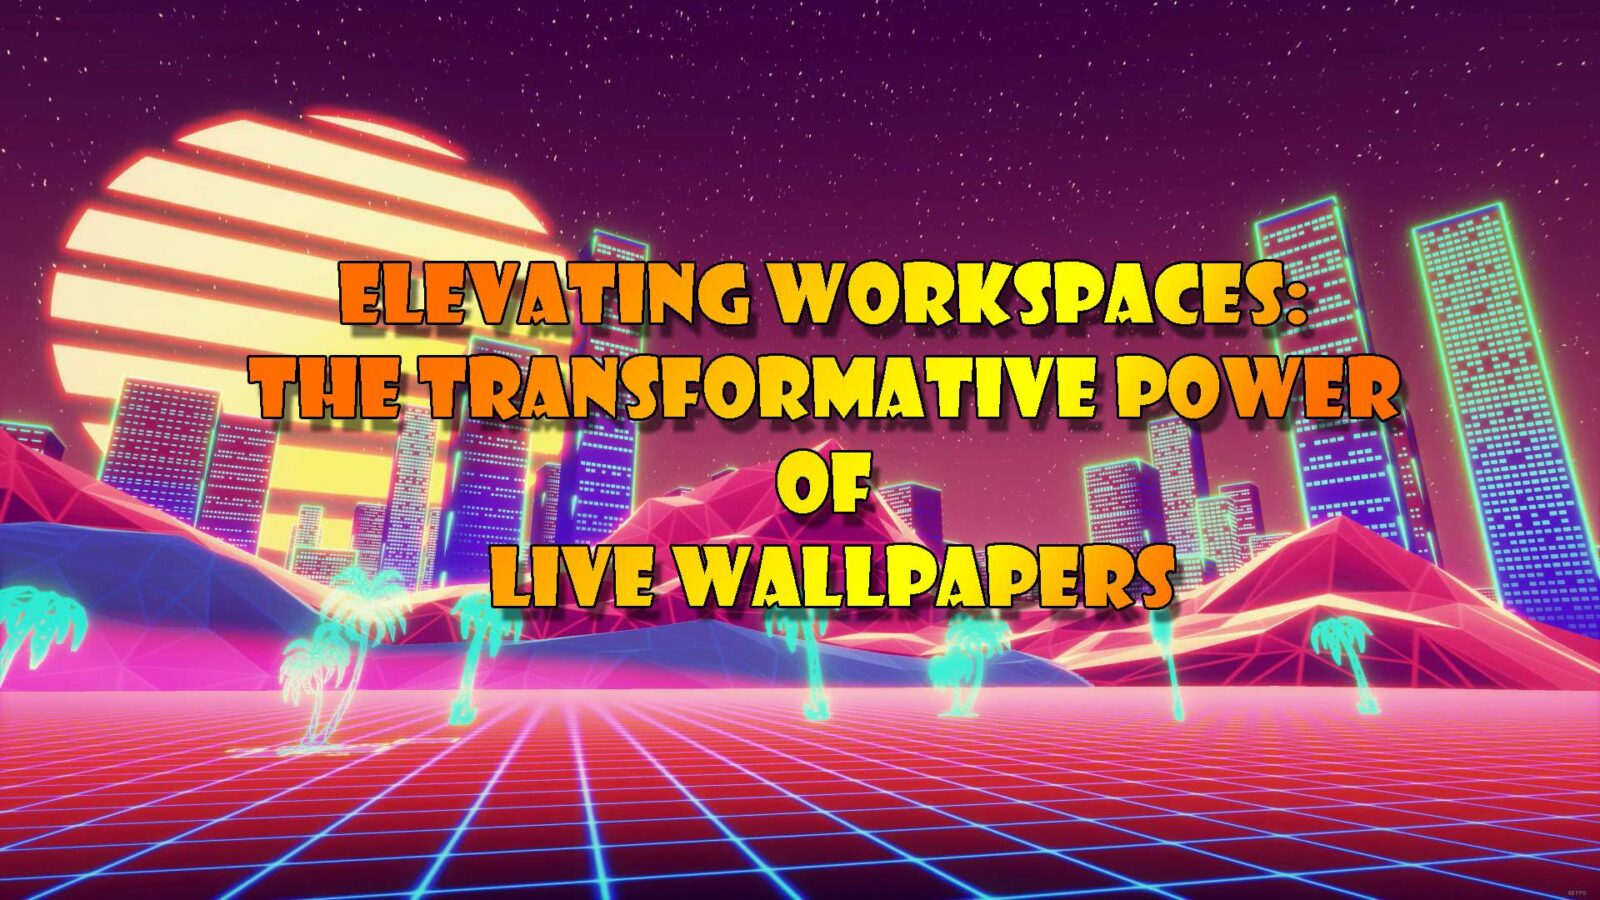 LiveWallpapers4Free.com | Elevating Workspaces: The Transformative Power of Live Wallpapers